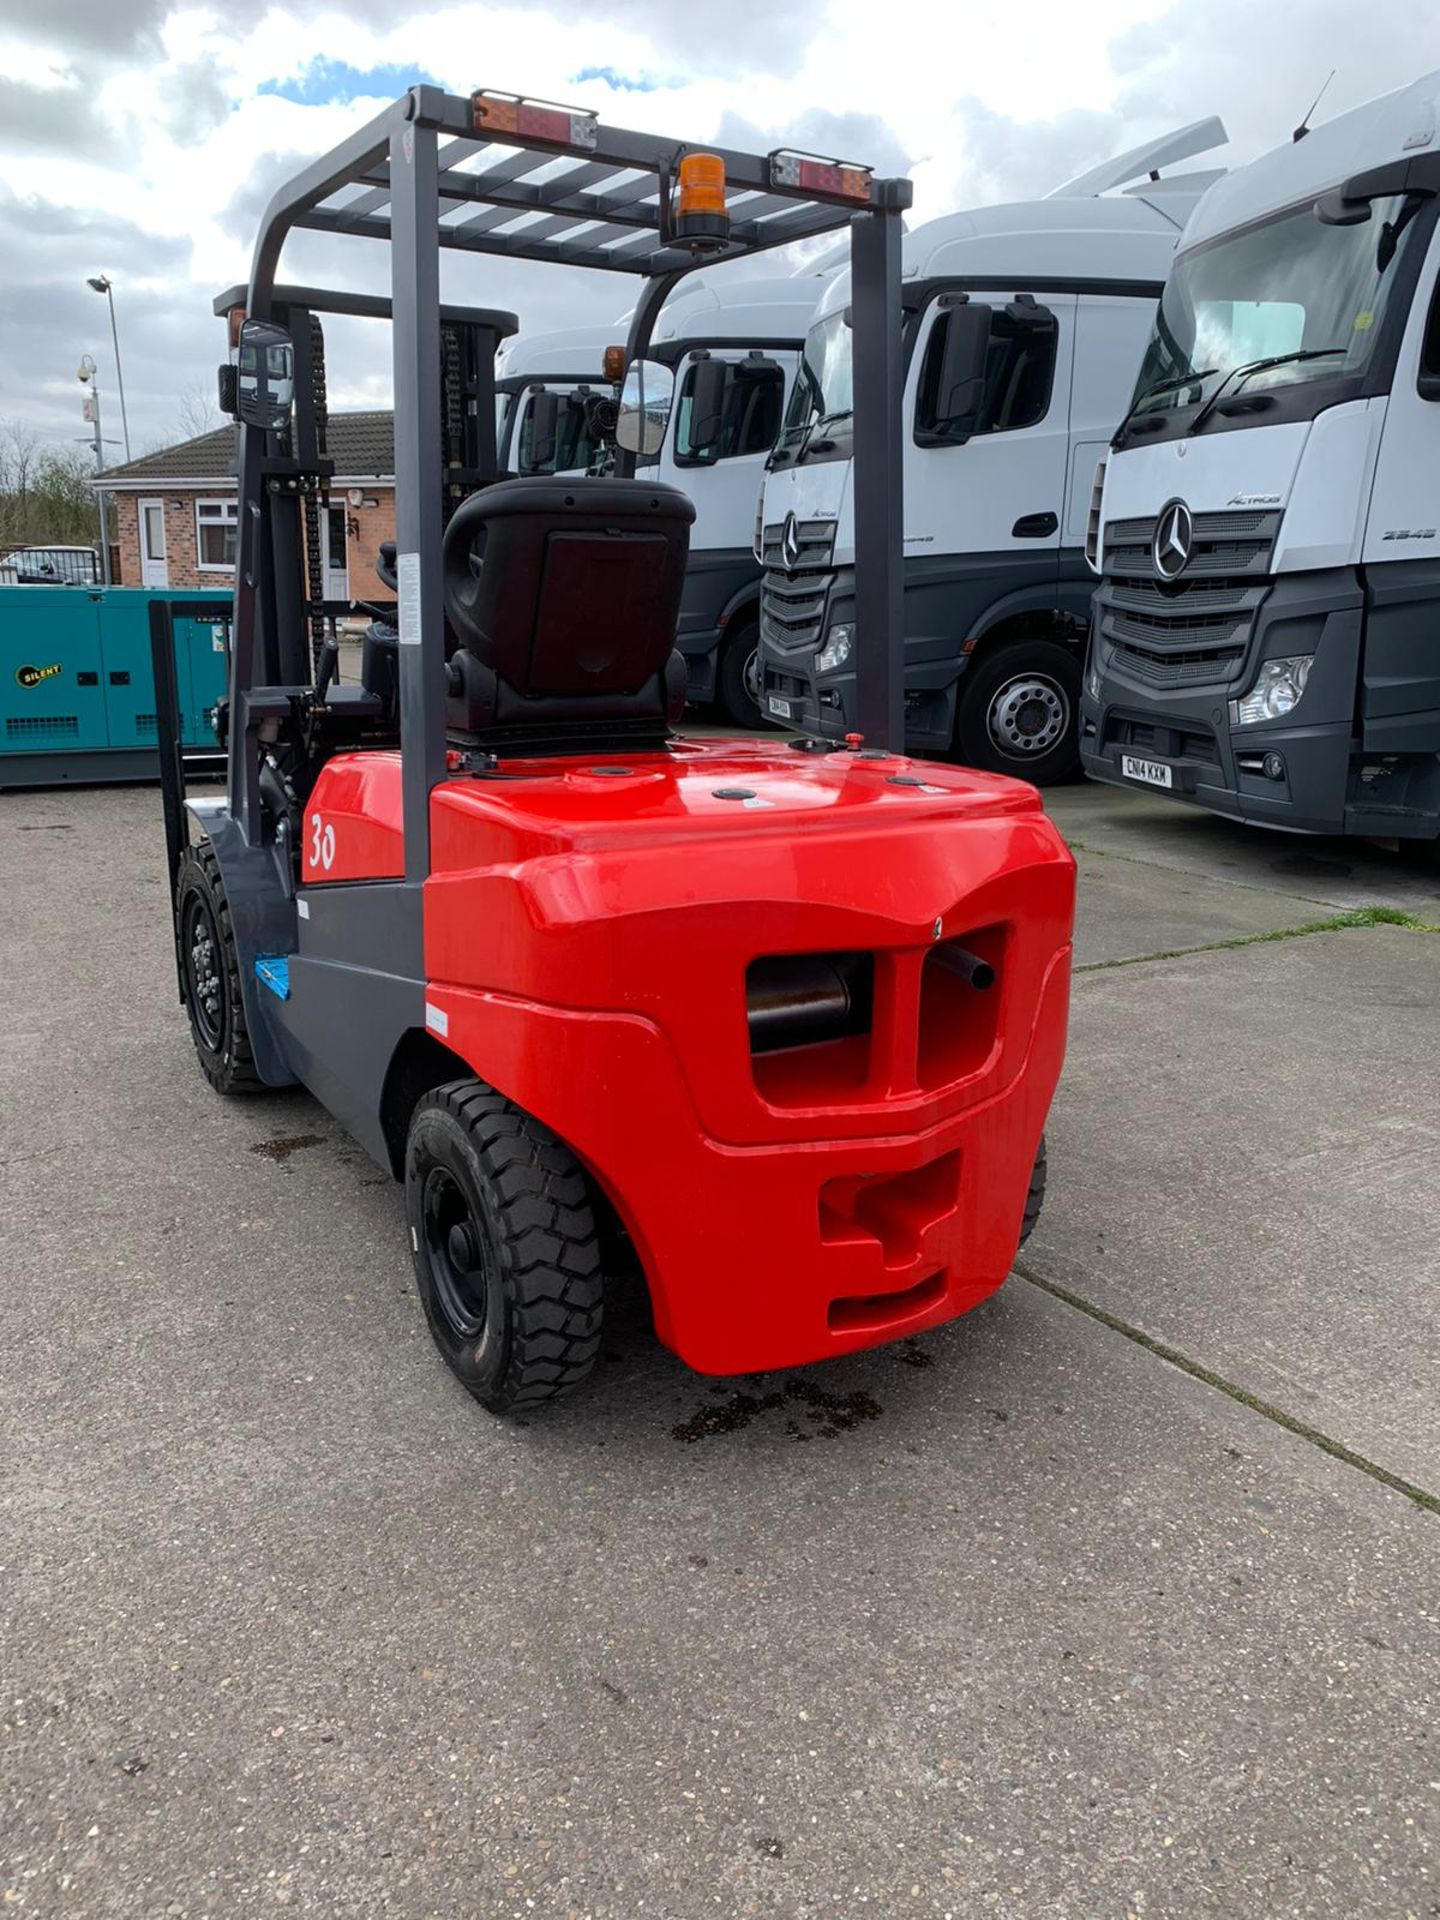 2019 Feeler FD30 Counterbalanced Forklift - Image 4 of 8